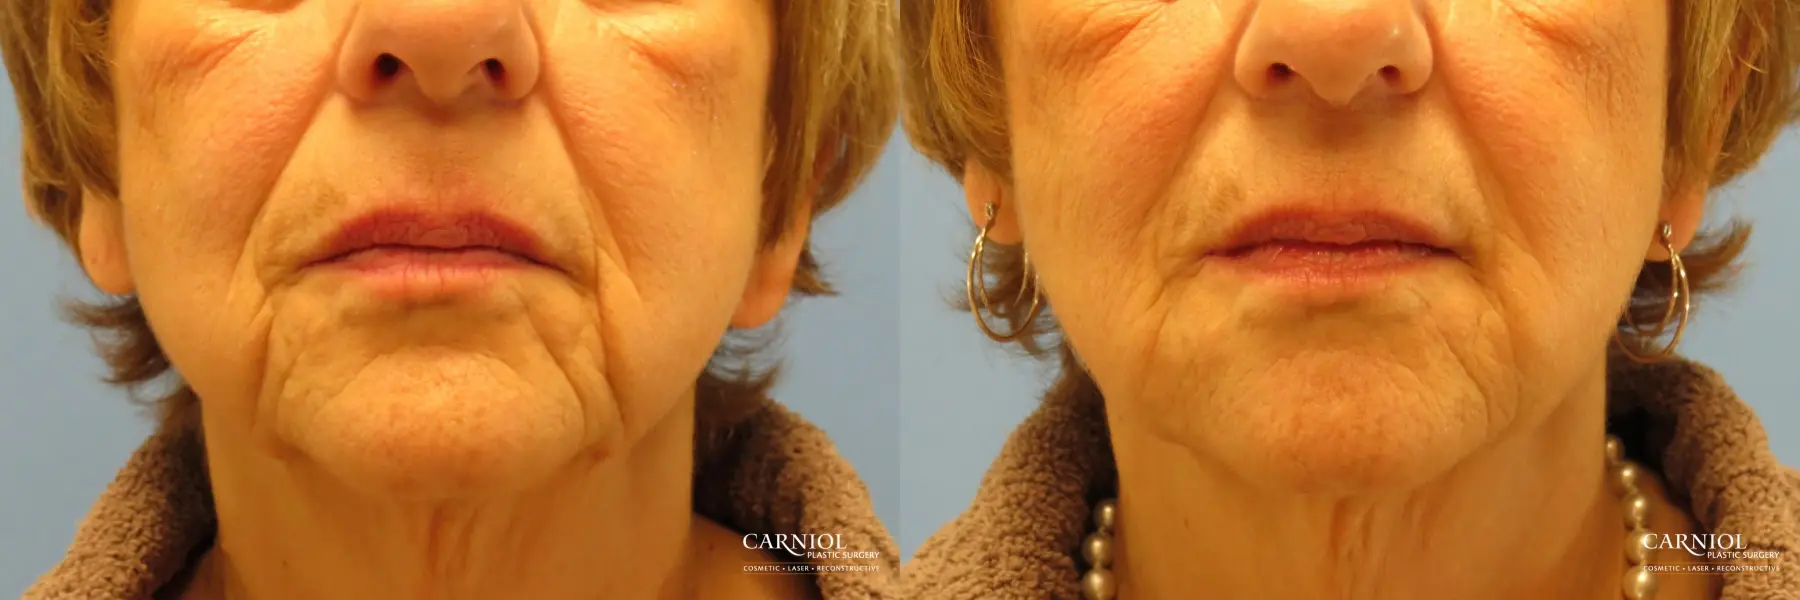 Non-Surgical Facelift: Patient 1 - Before and After  